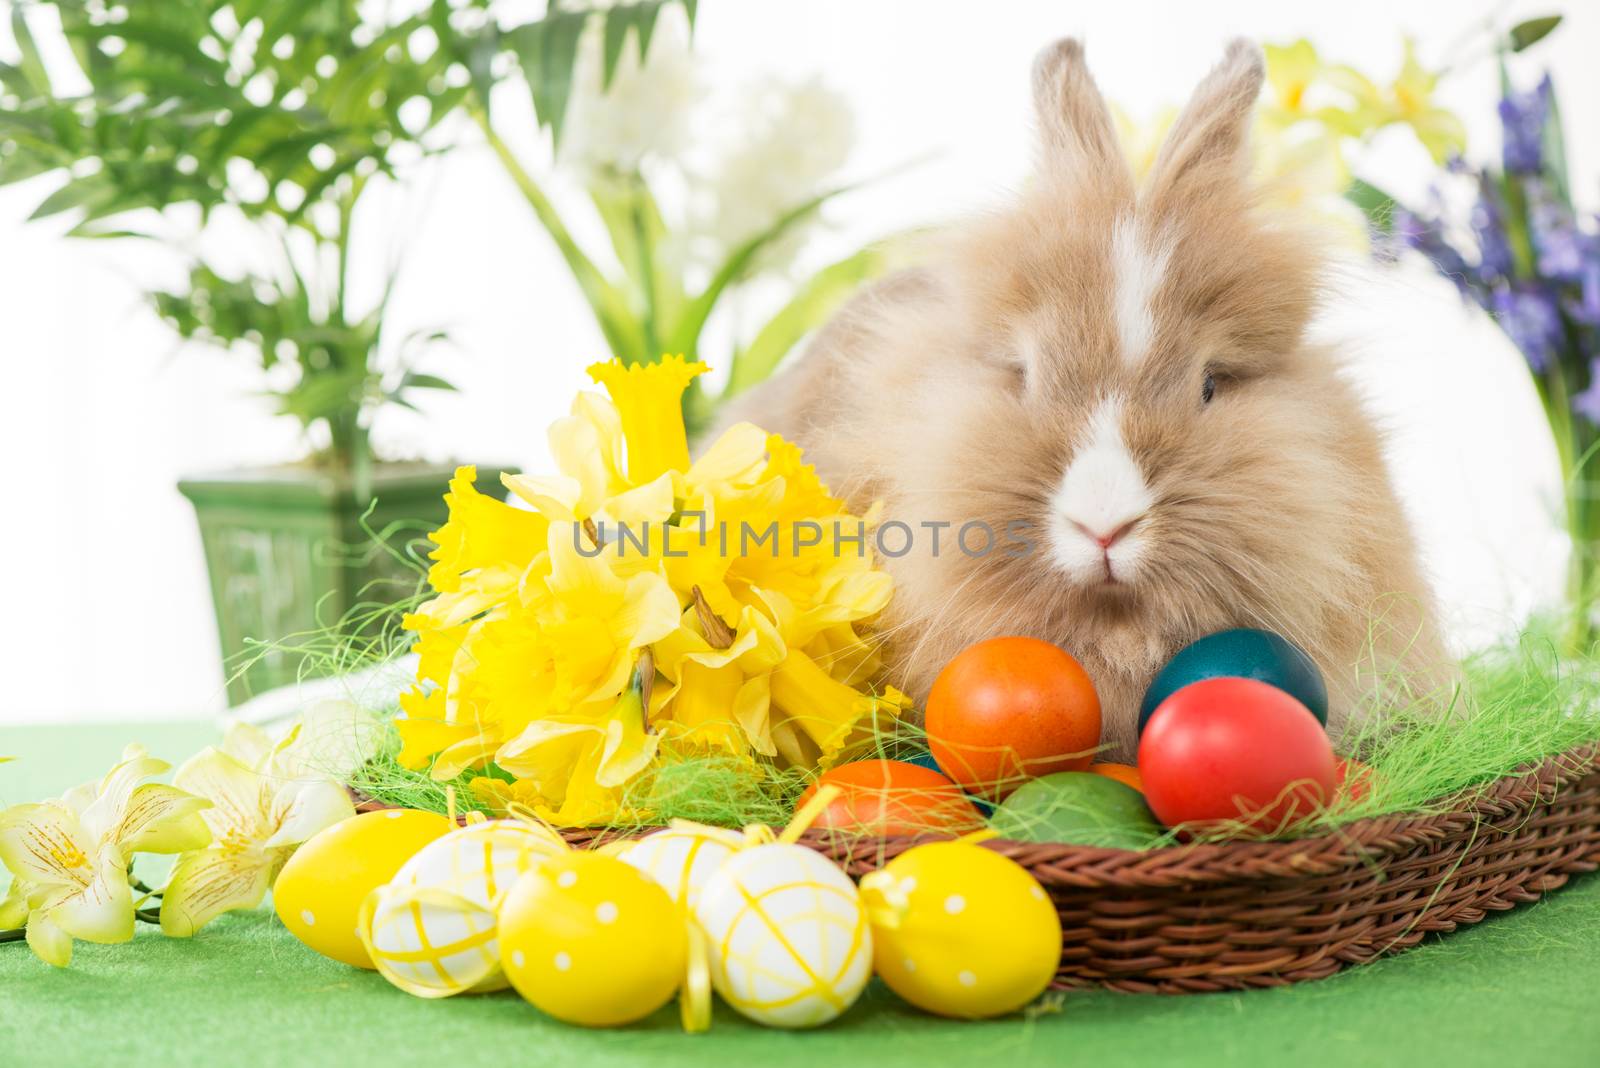 Easter Bunny by MilanMarkovic78